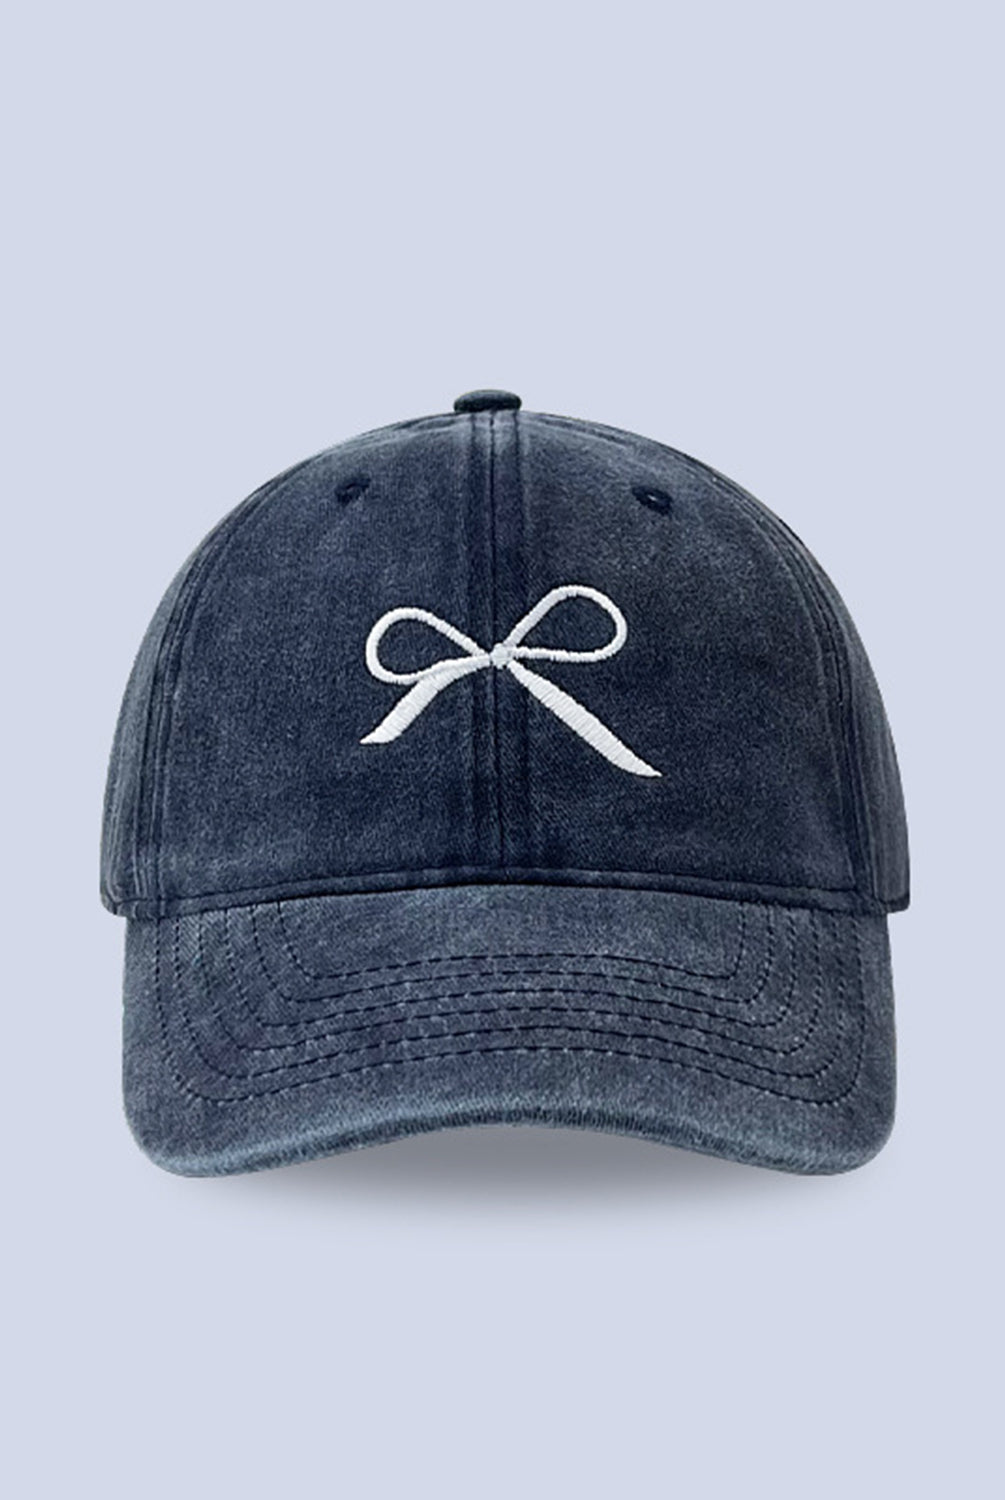 Bow Embroidered Adjustable Cap - GemThreads Boutique Bow Embroidered Adjustable Cap